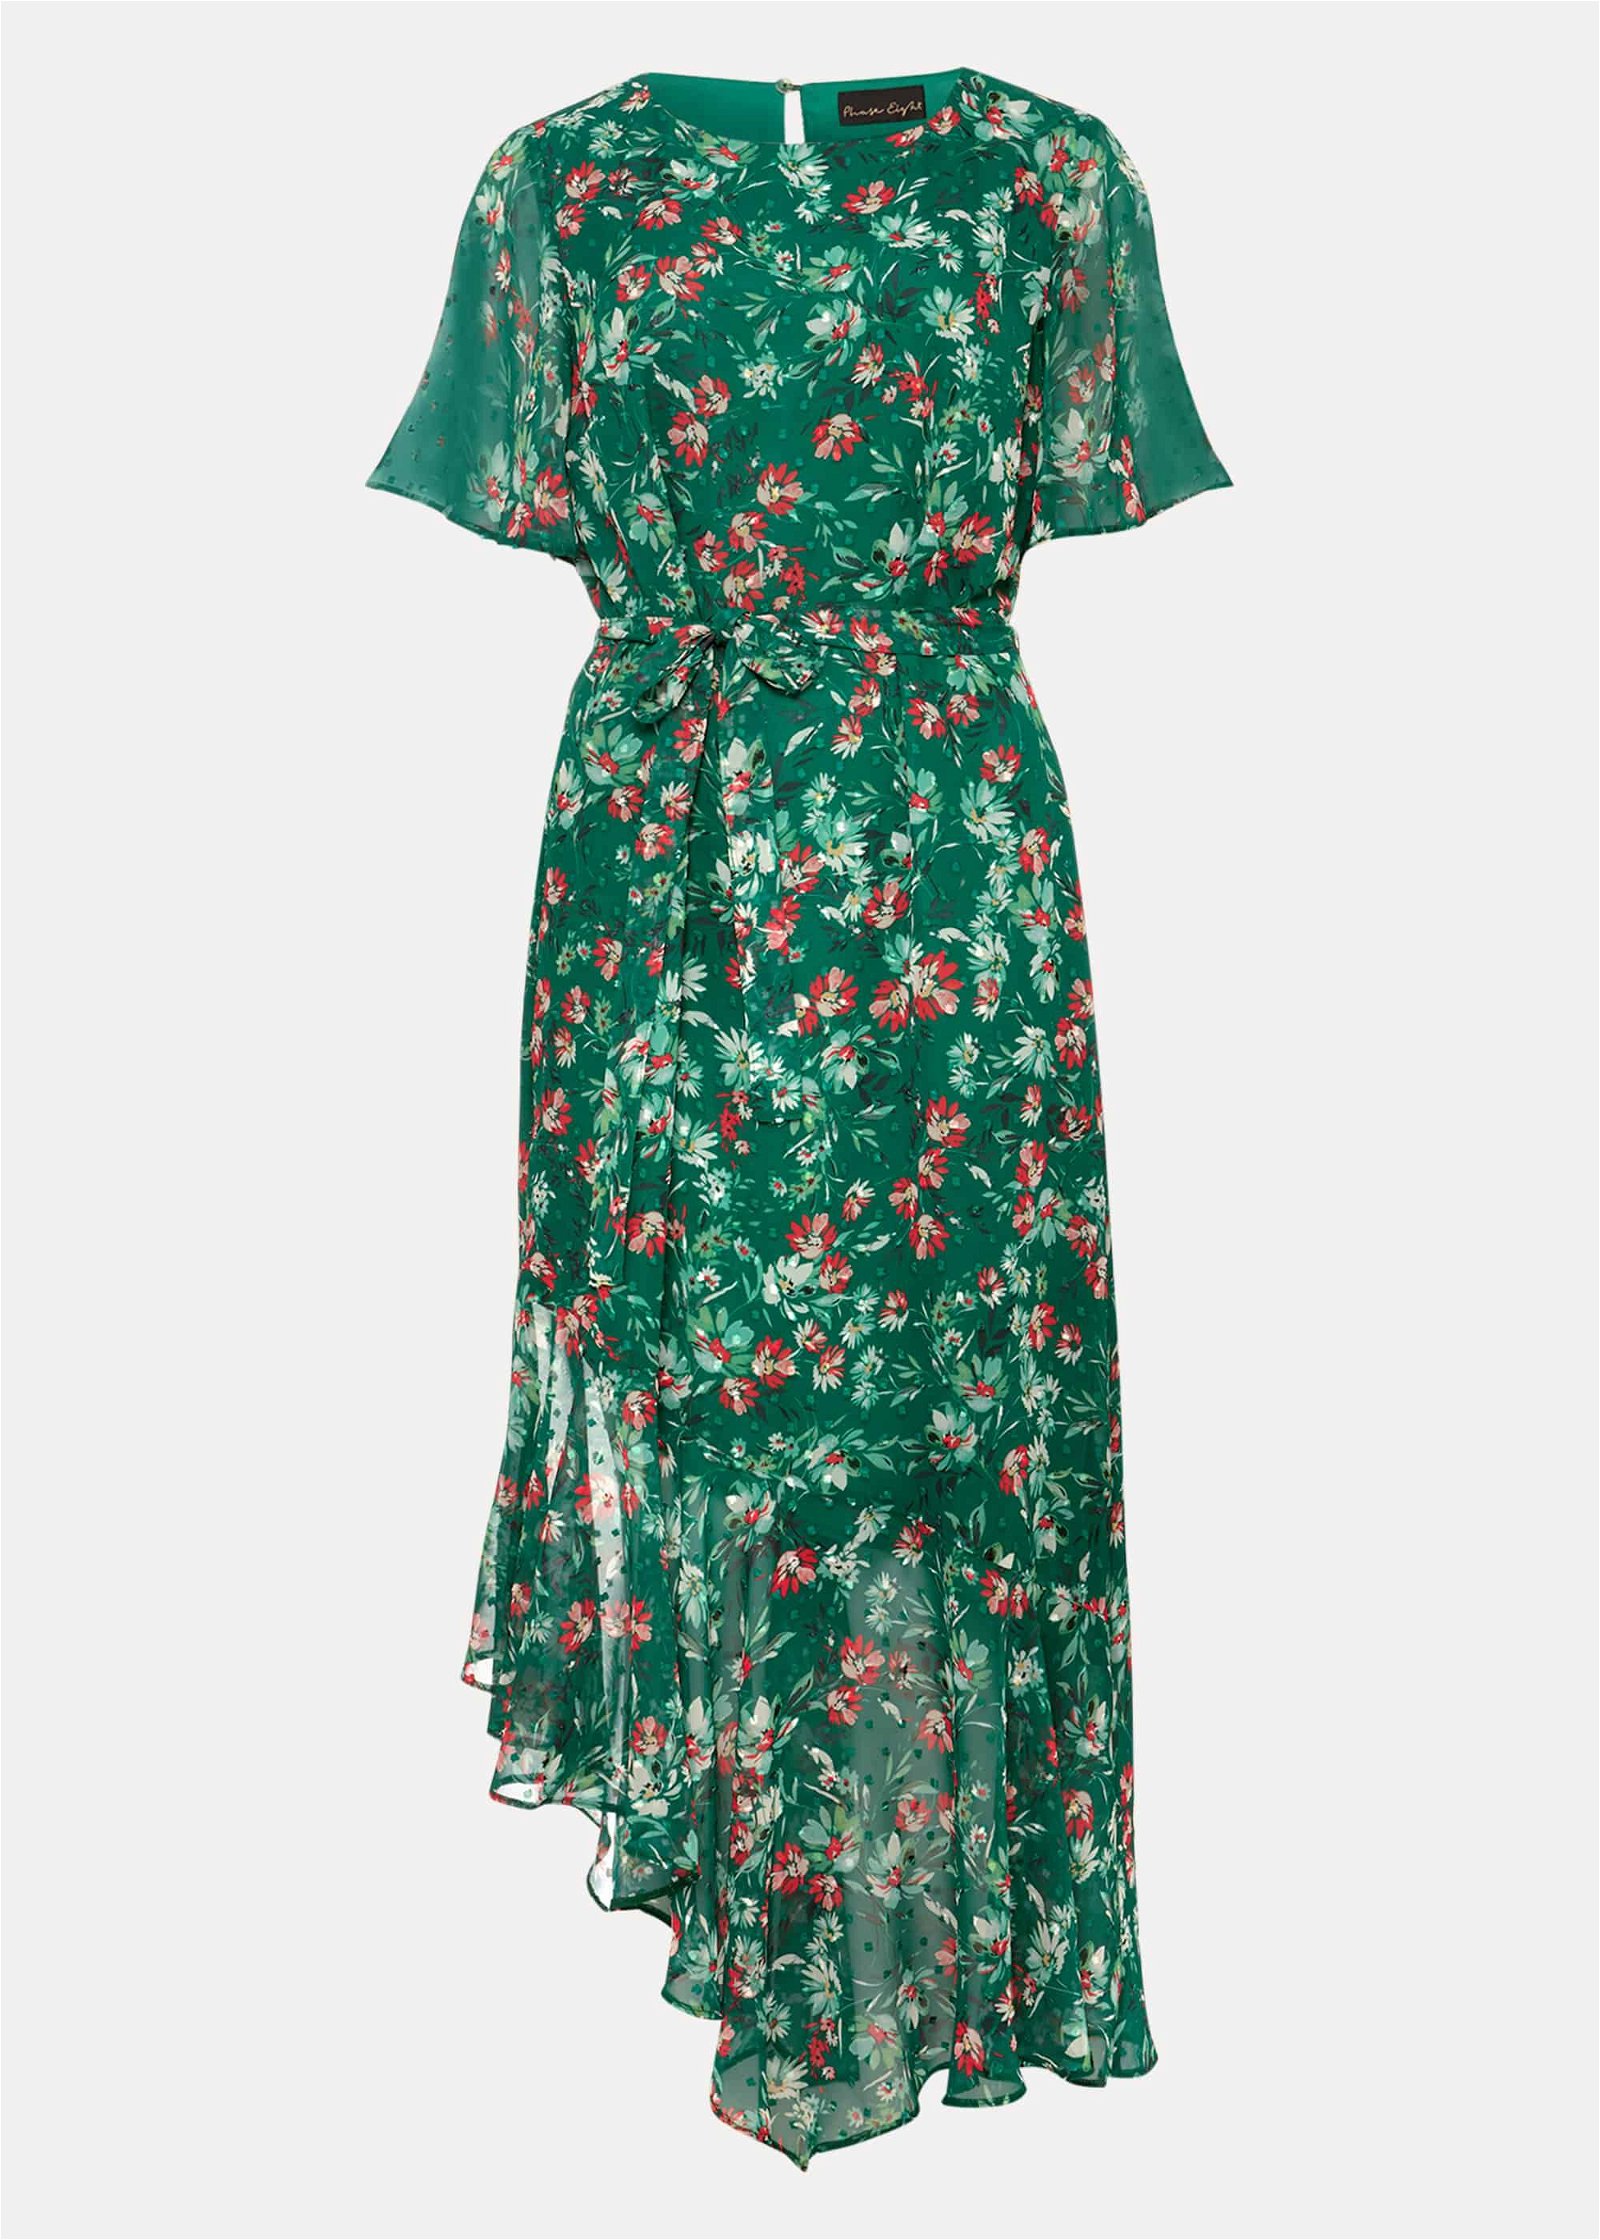 Phase Eight Indiana Floral Maxi Dress, Pine Green/Multi